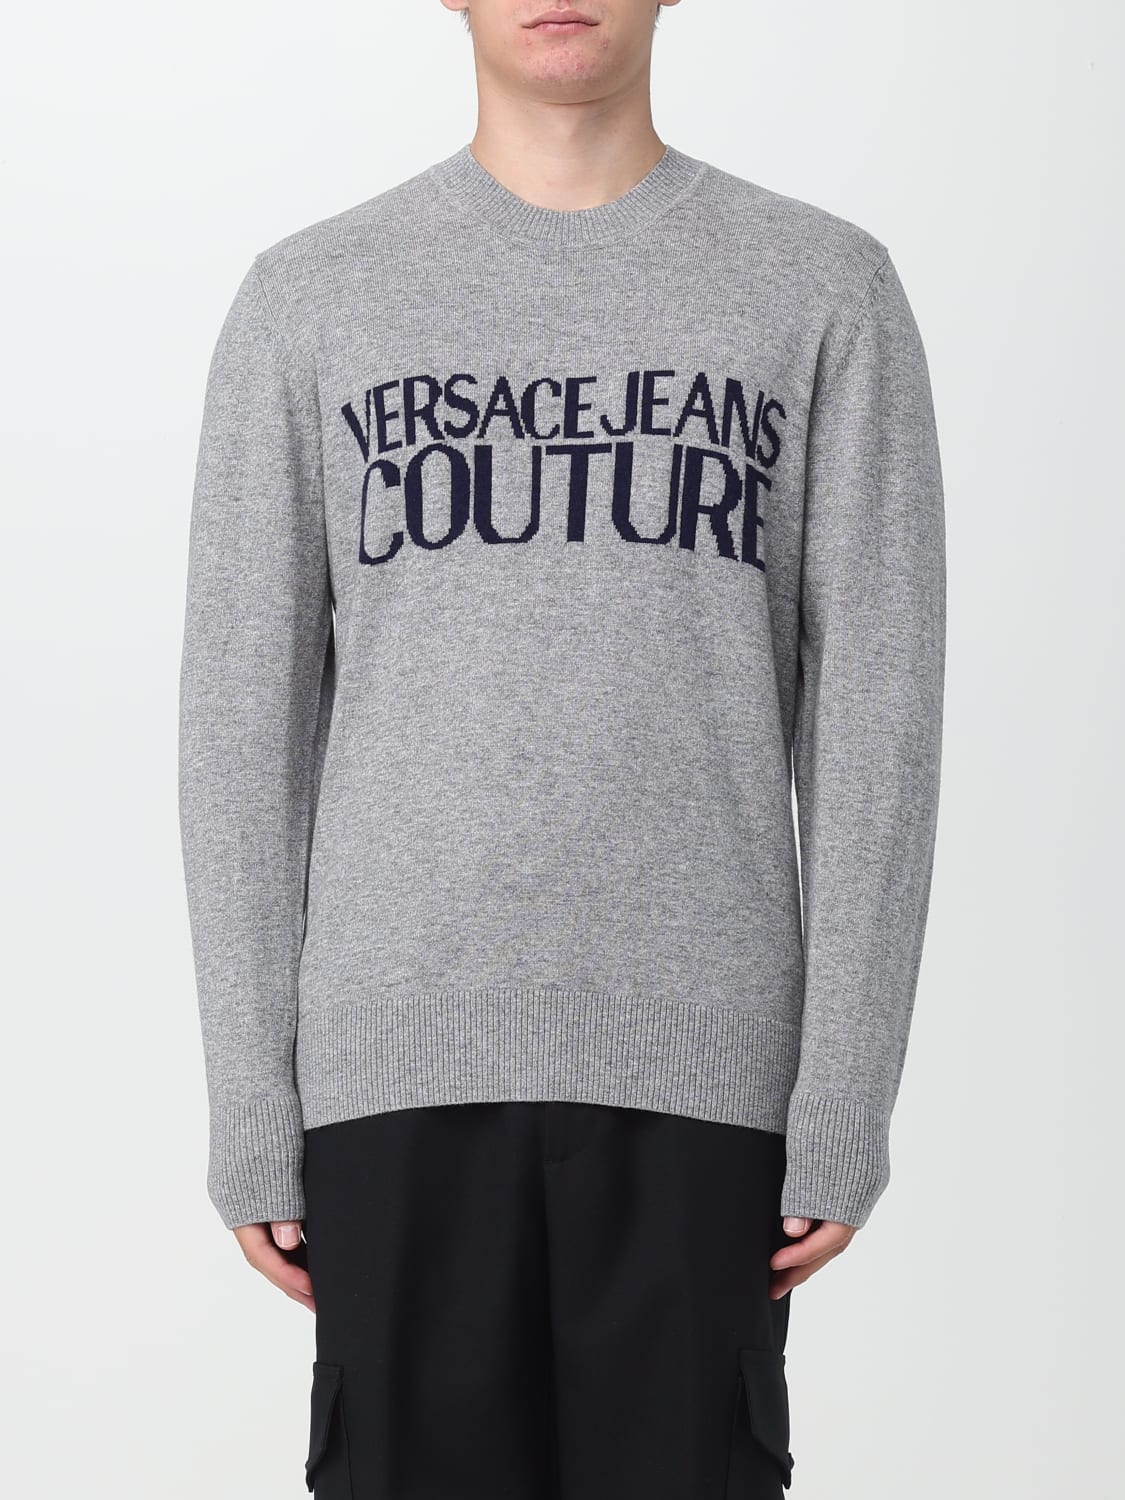 VERSACE JEANS COUTURE: sweater for man - Black | Versace Jeans Couture sweater 75GAFM01CM31H online at GIGLIO.COM